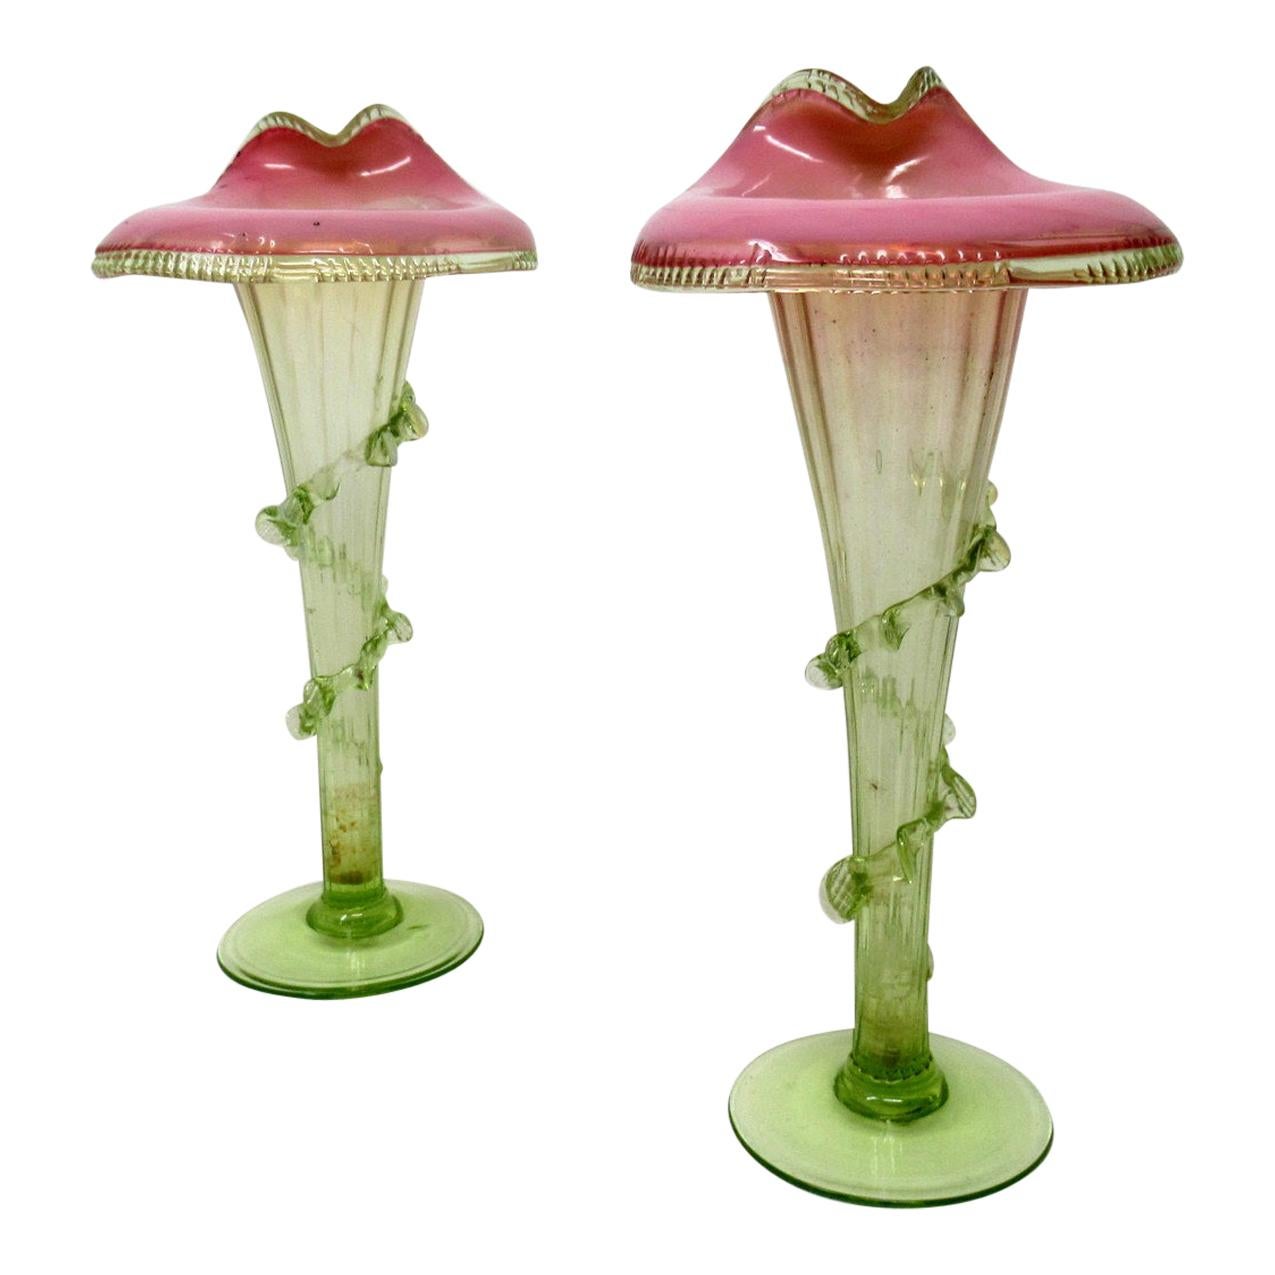 Pair of Jack in the Pulpit Victorian Iridescent Glass Flower Vases Thomas Webb